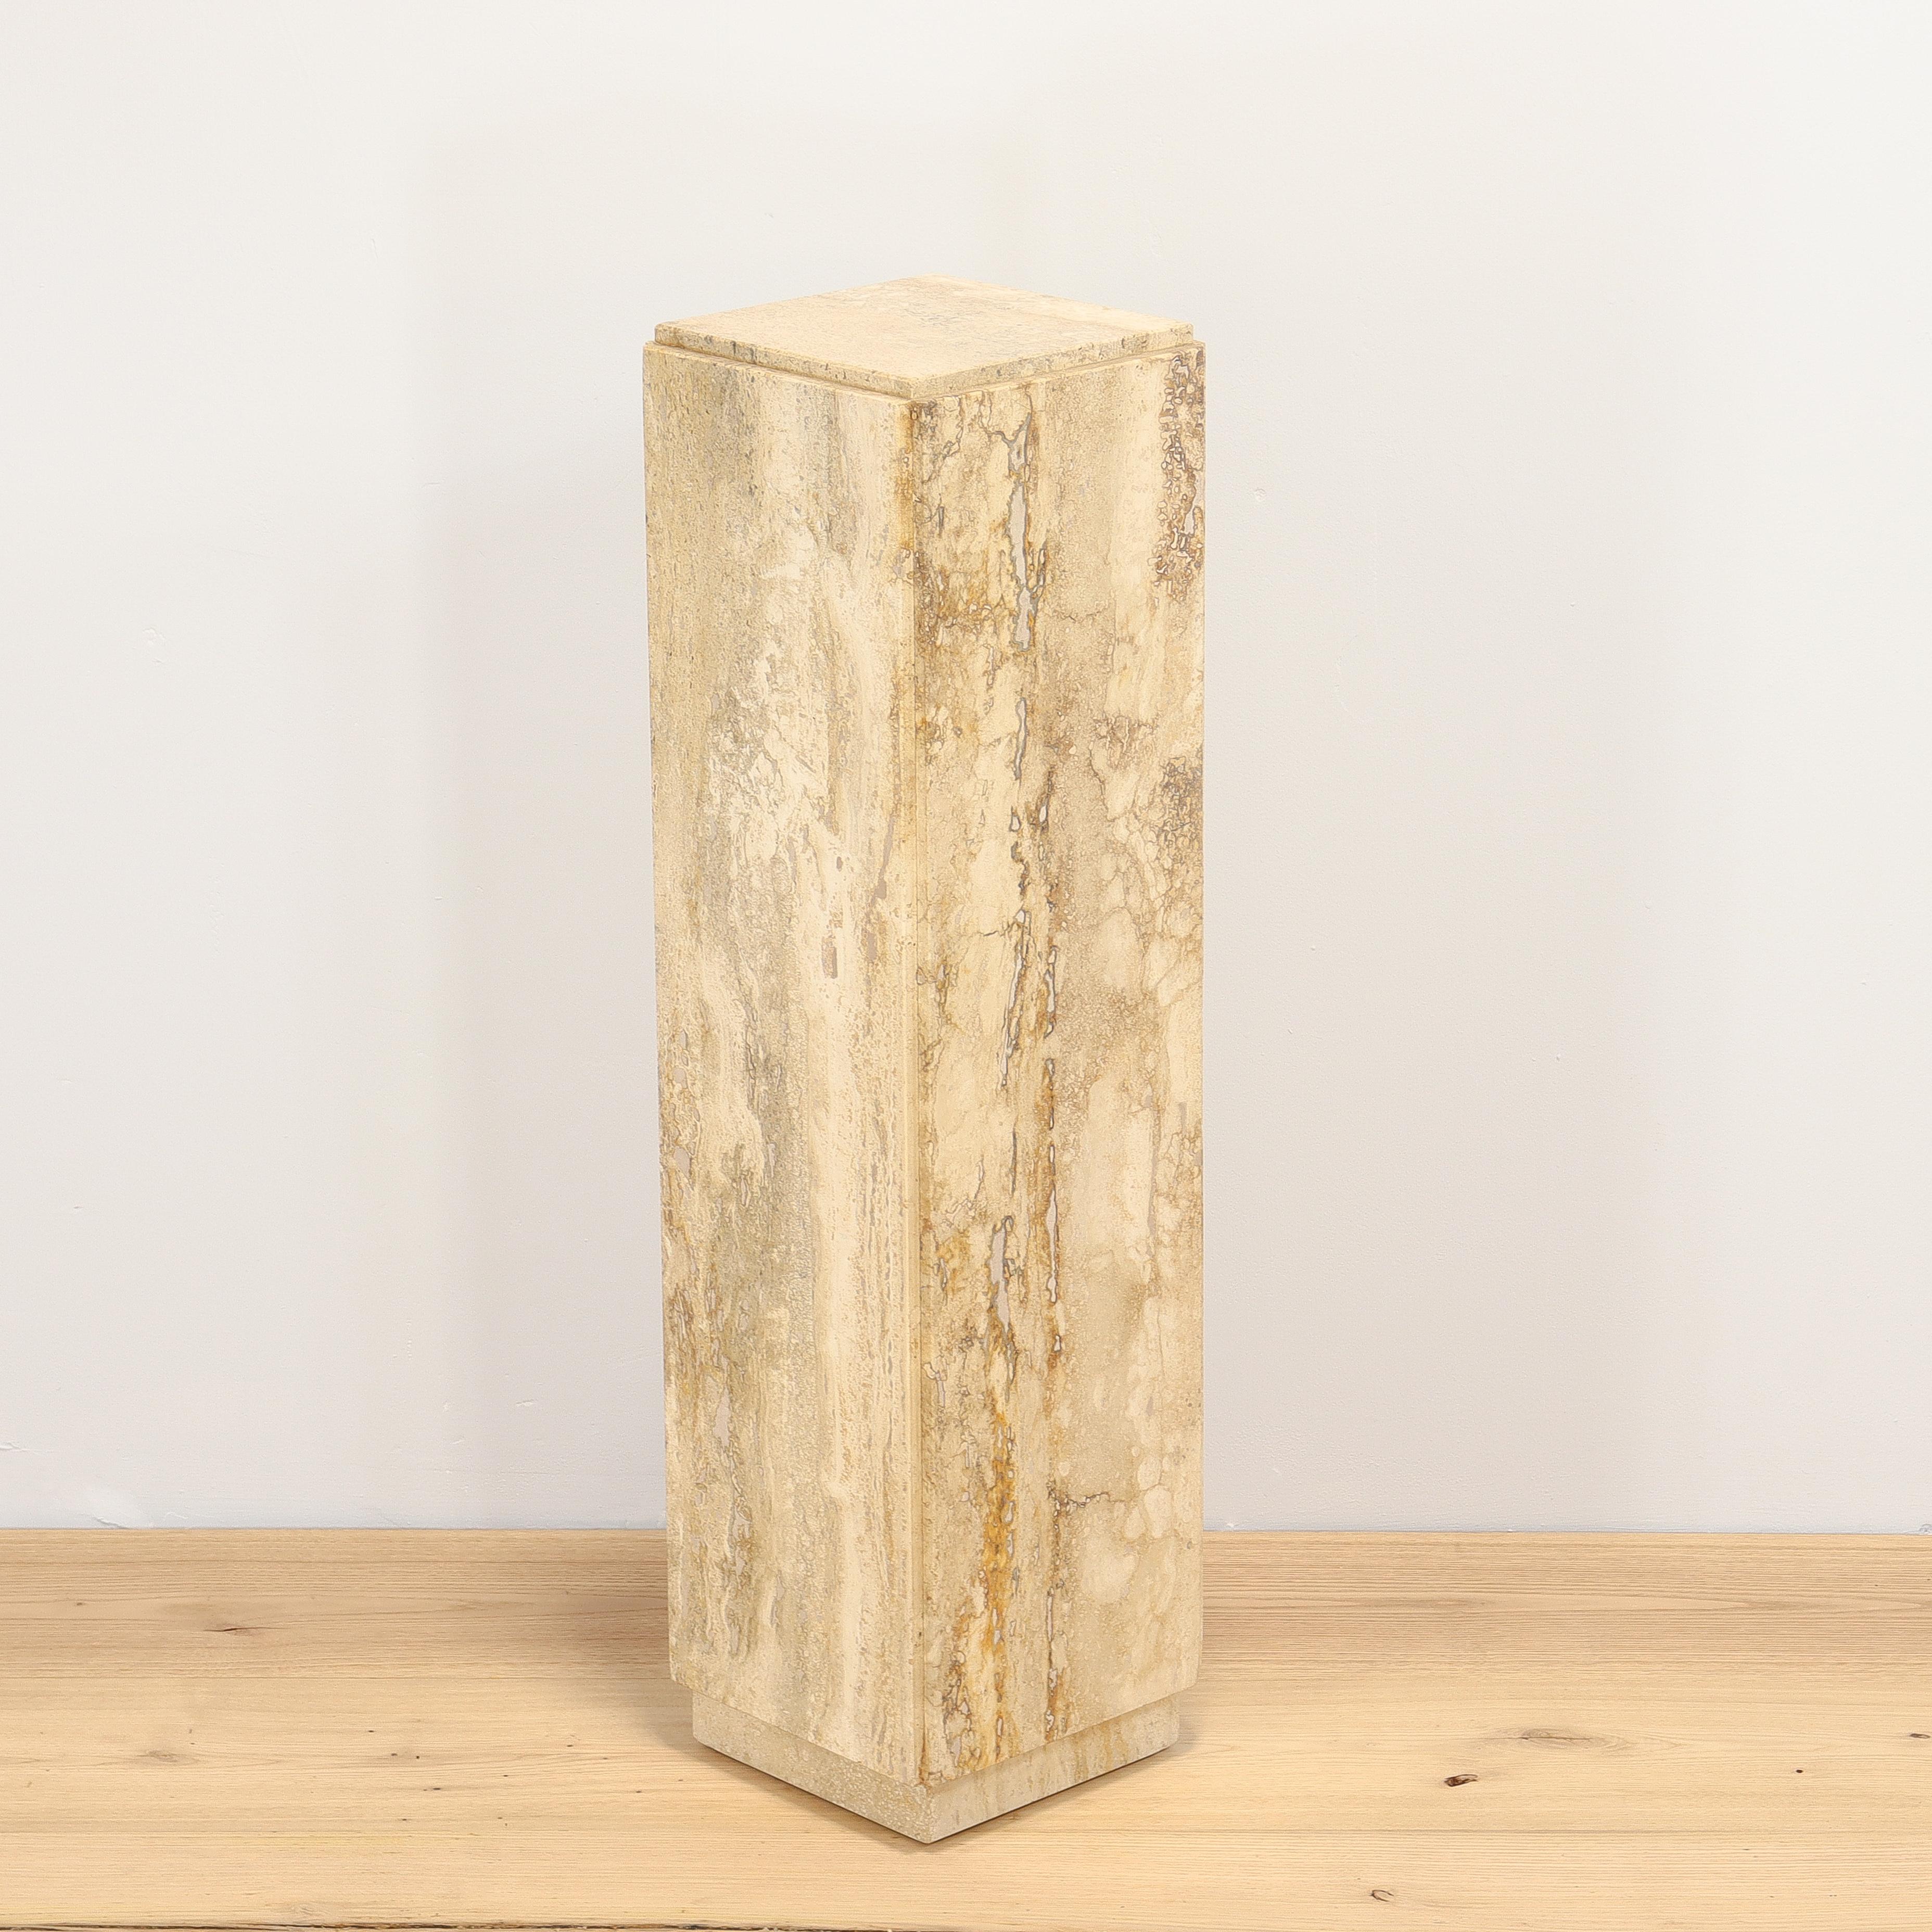 A fine Mid-Century Modern travertine pedastal.

With chamfered panels to each side, a rich variegation to the stone, and a smooth polished surface.

Simply great midcentury design!

Date:
1970s

Overall Condition:
It is in overall good, as-pictured,